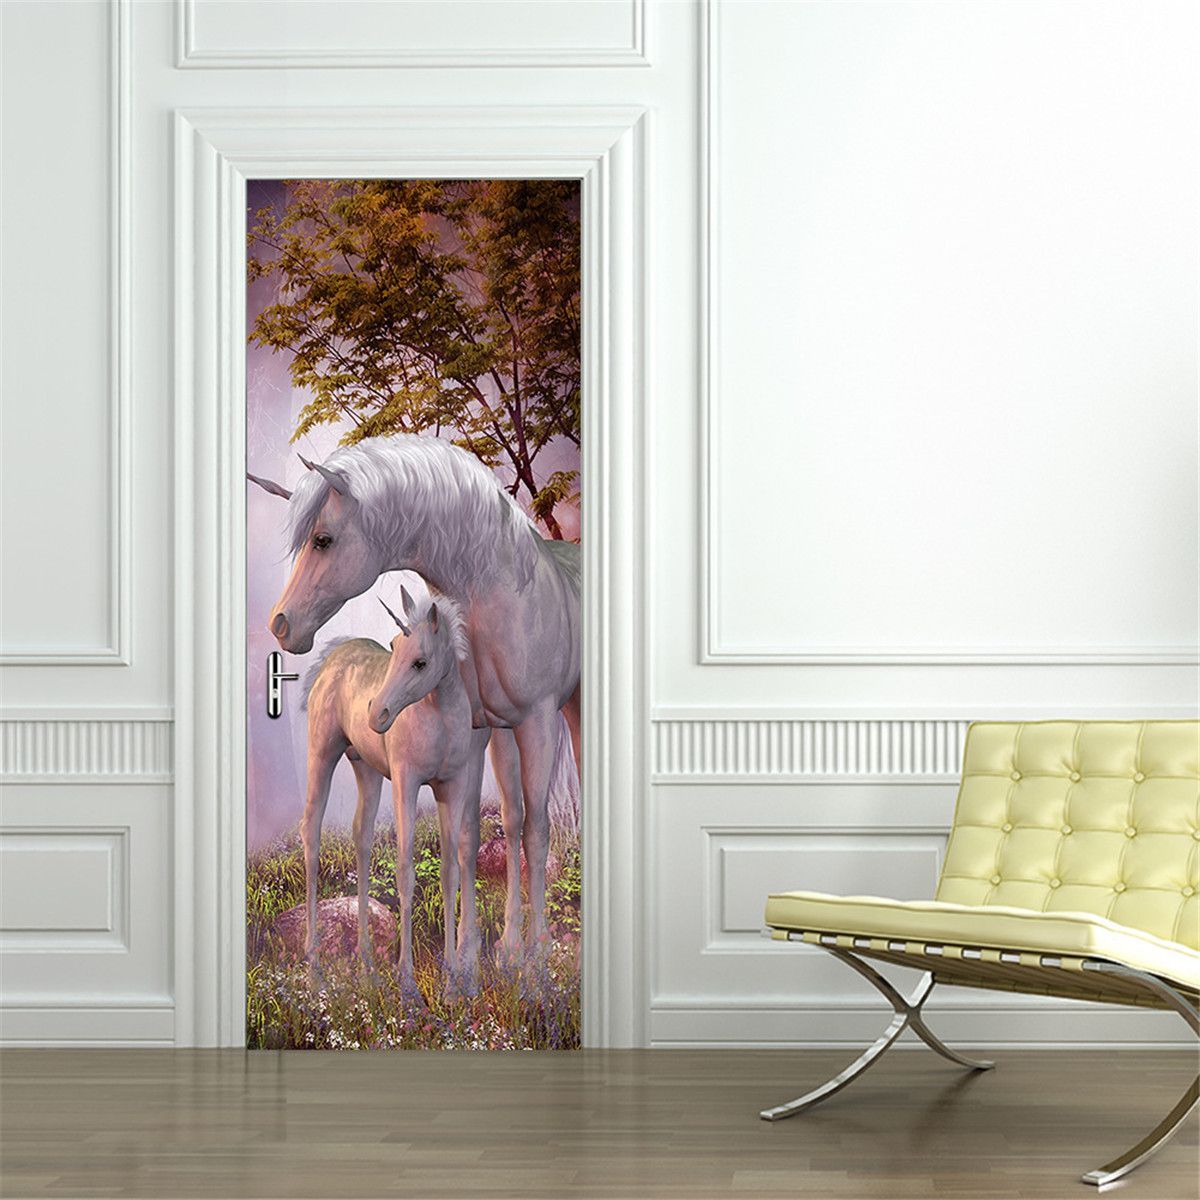 77200cm-PVC-3D-Door-Wall-Sticker-The-Unicorn-In-The-Forest-DIY-House-Decorations-1291303